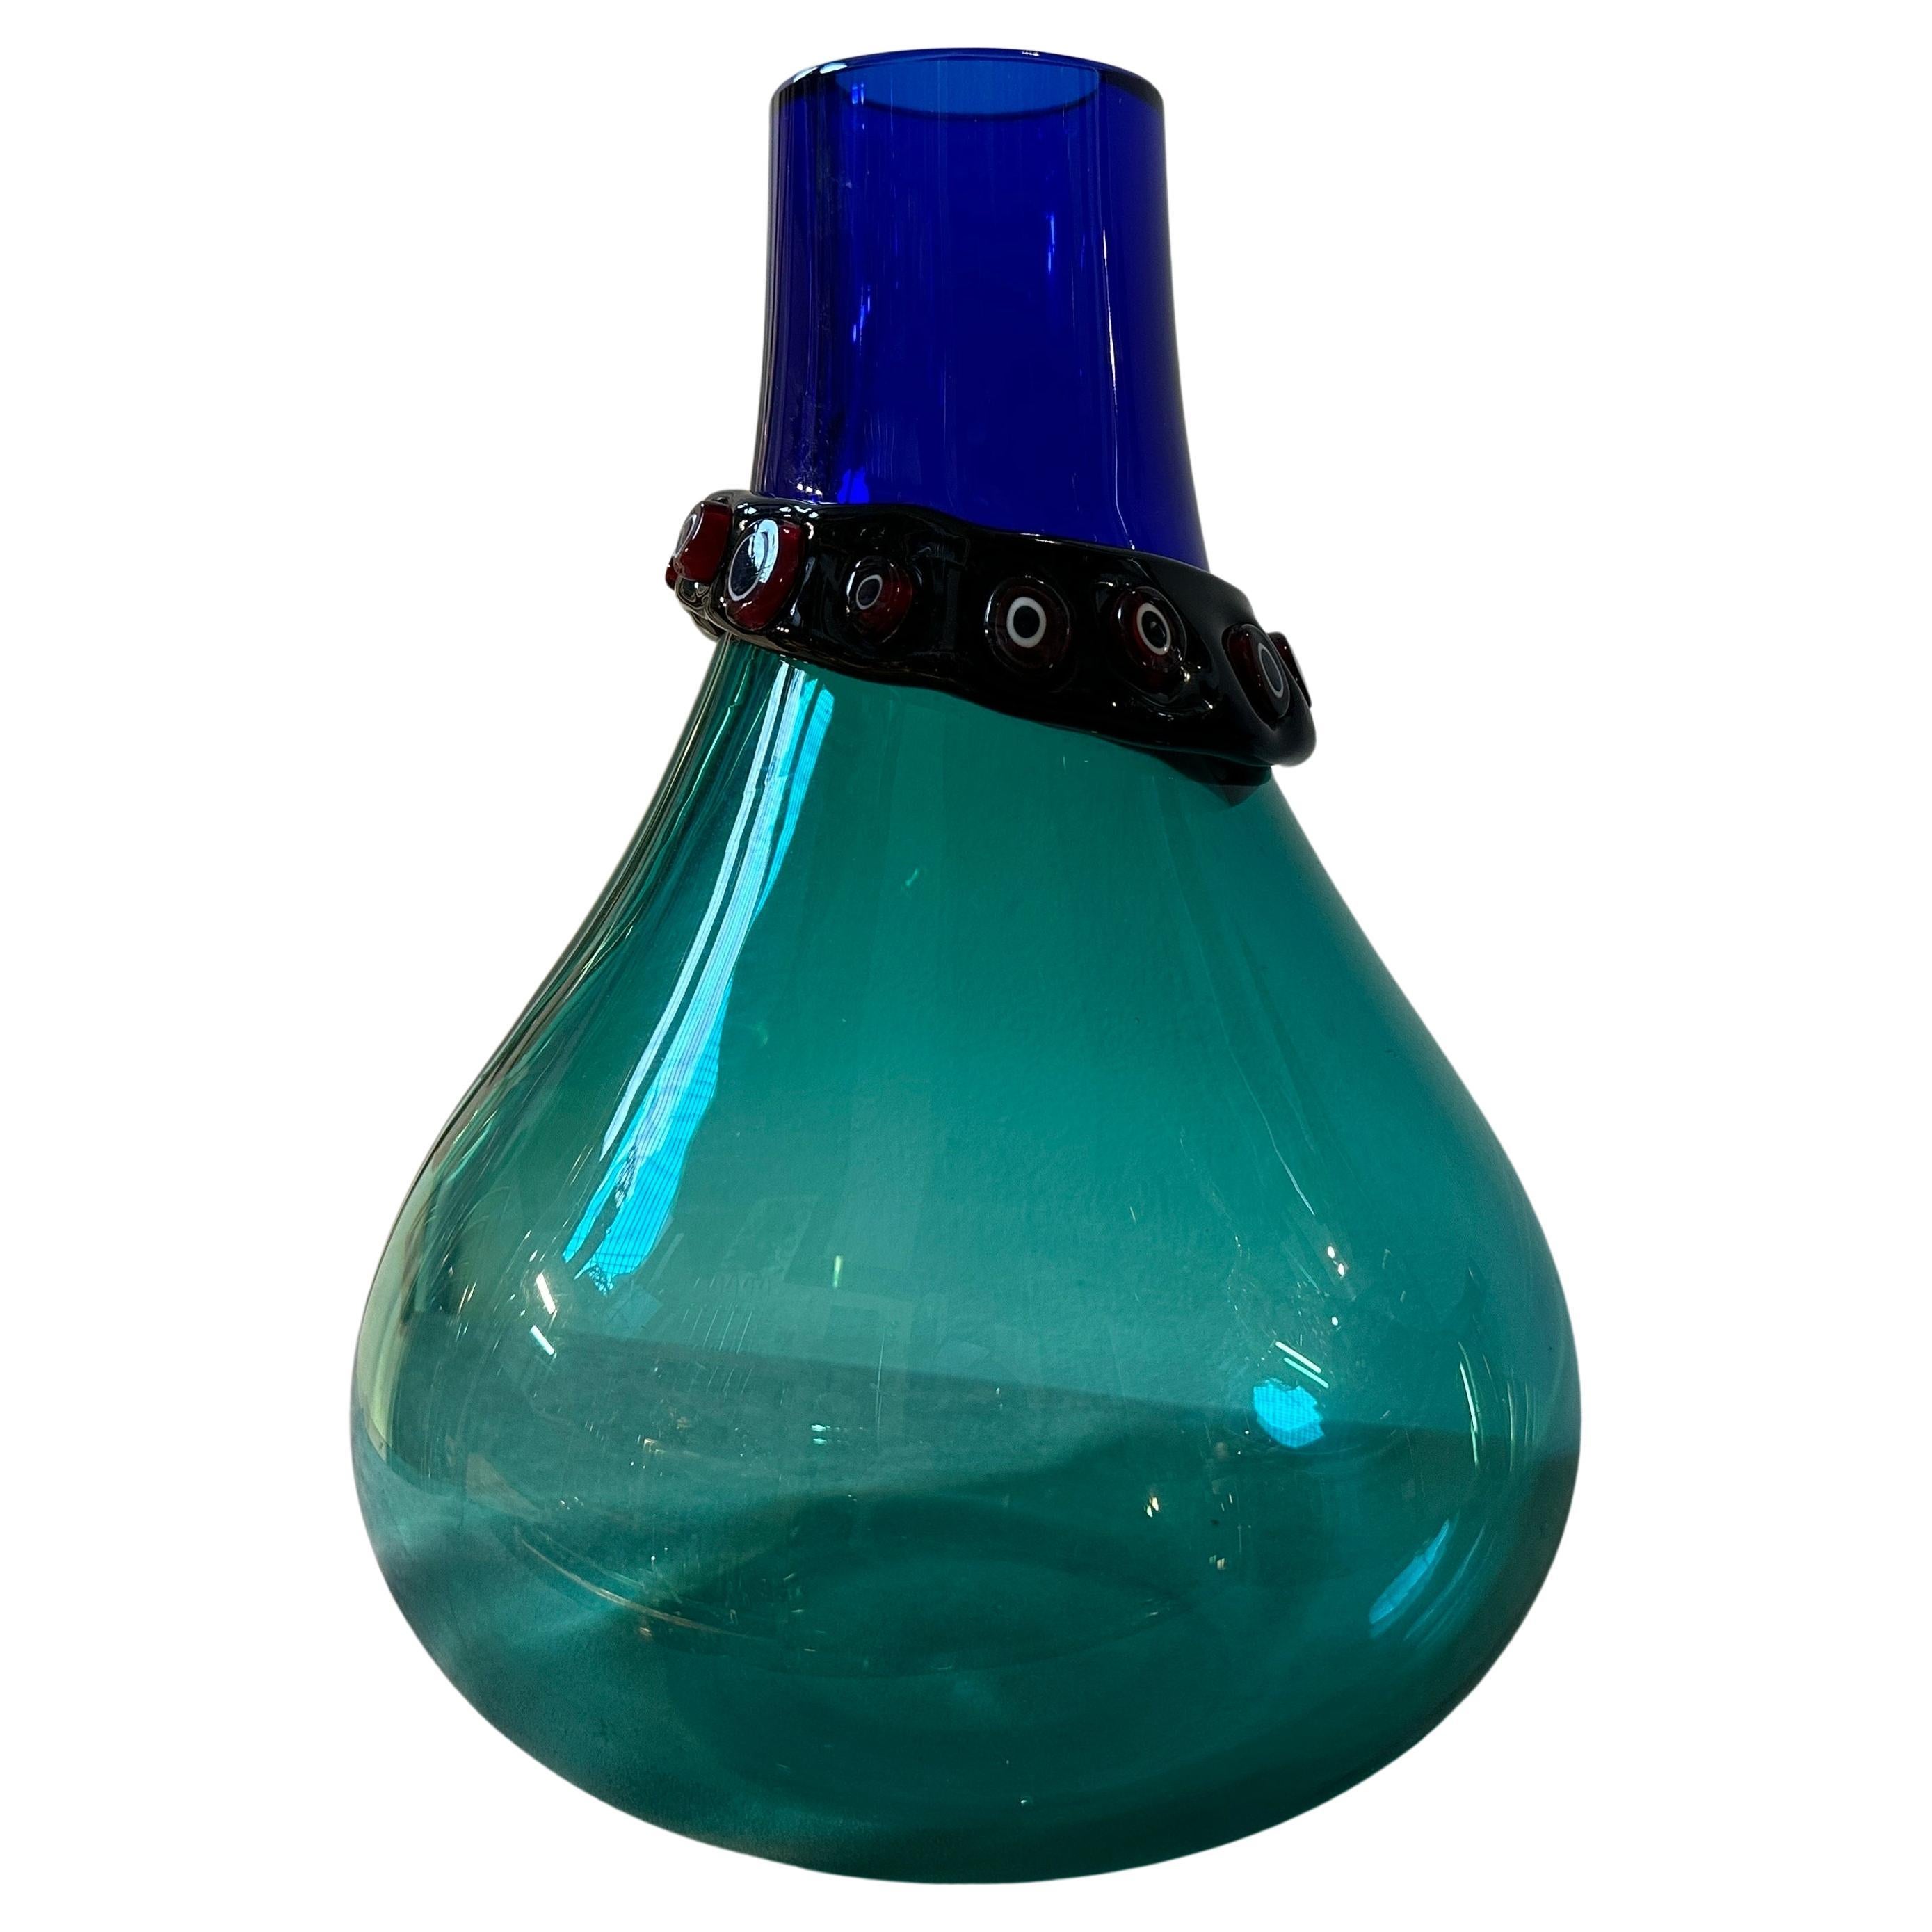 This Murano Glass vase by Alfredo Barbini is a highly collectible and visually striking piece, embodying the beauty, innovation, and artistry of Murano glassmaking during that era. Alfredo Barbini was a renowned glass artist and designer who played